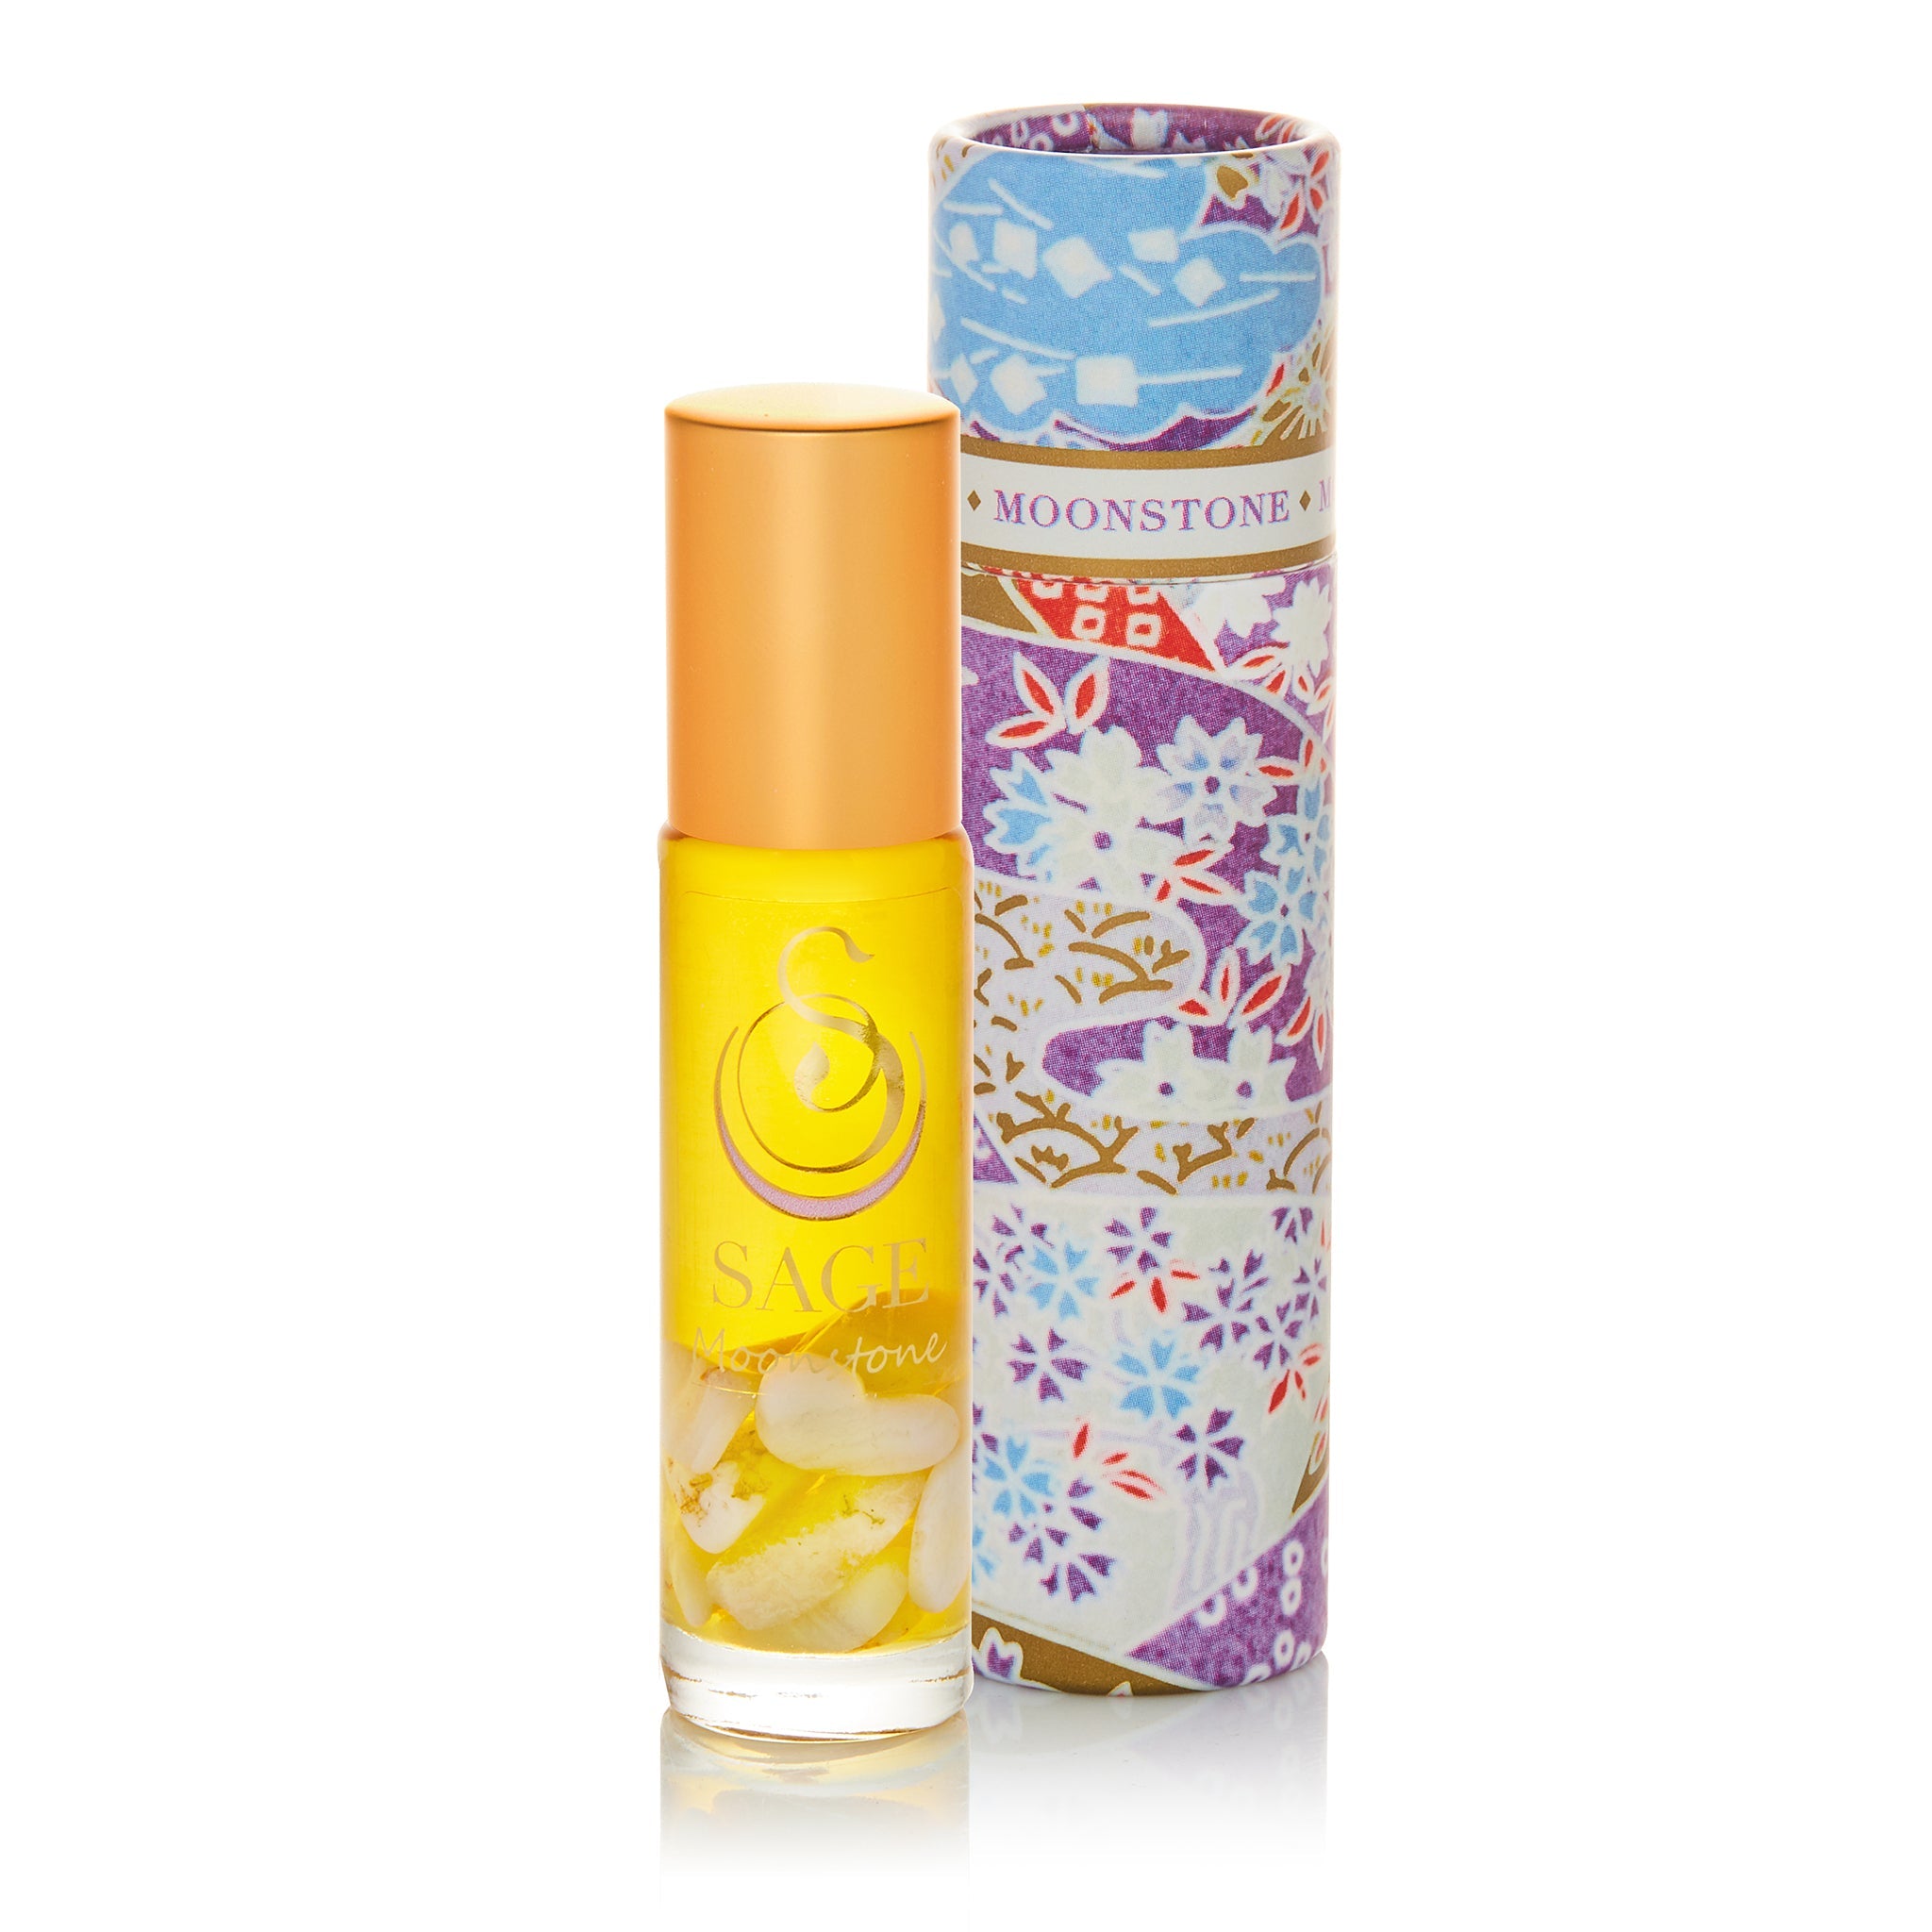 OBSESSION ~ Moonstone Gemstone Perfume Roll-On and EDT Gift Set by Sage - The Sage Lifestyle